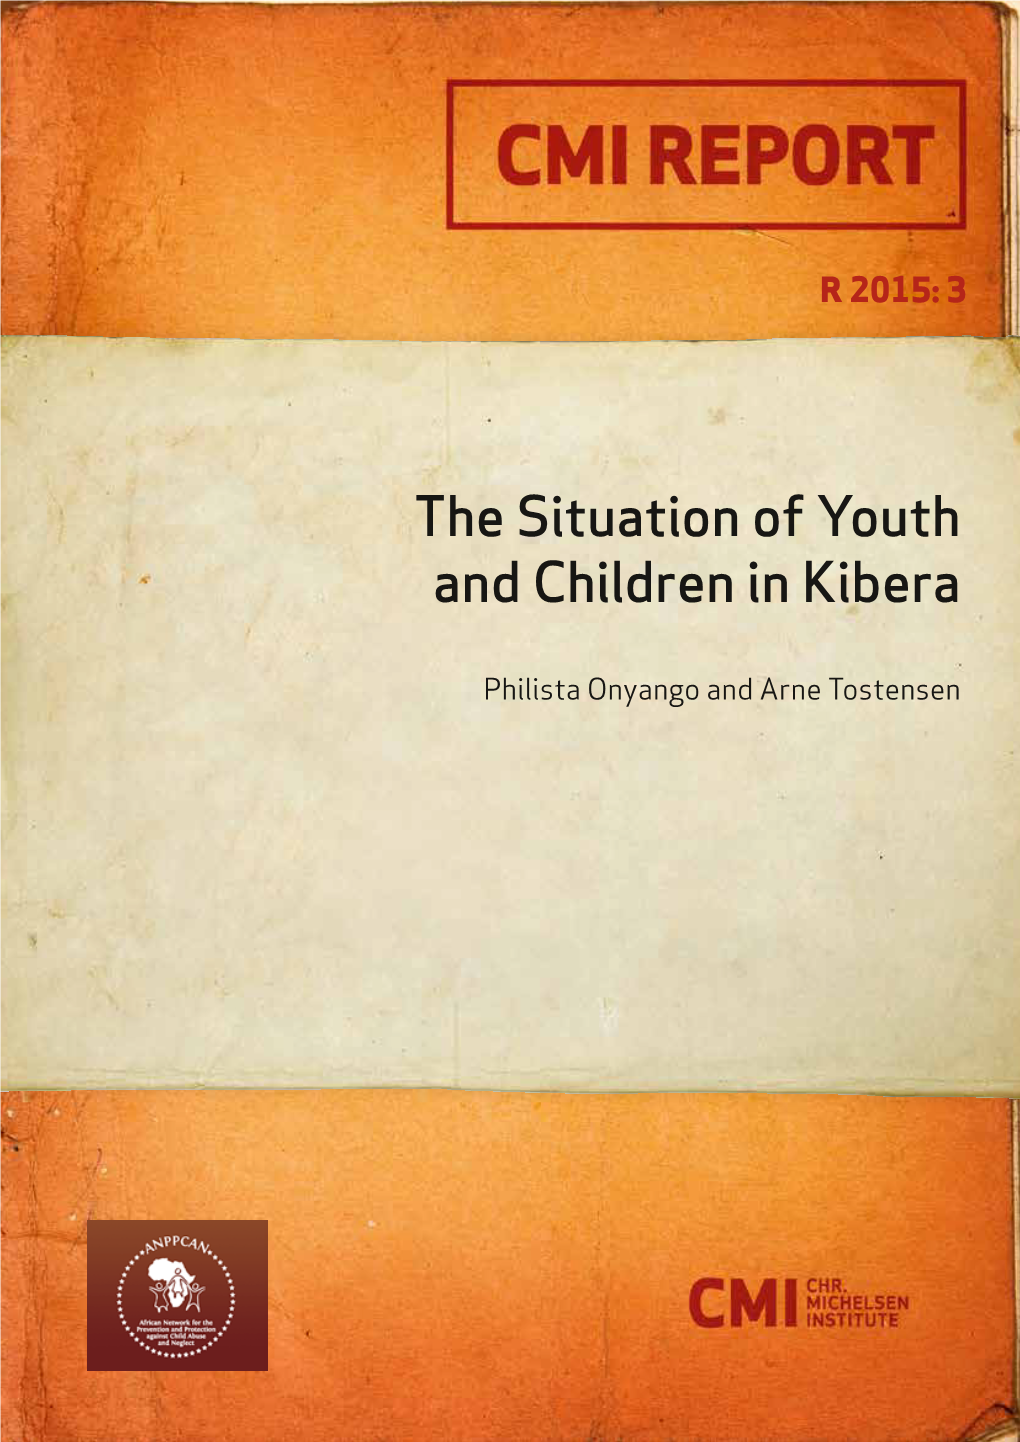 The Situation of Youth and Children in Kibera